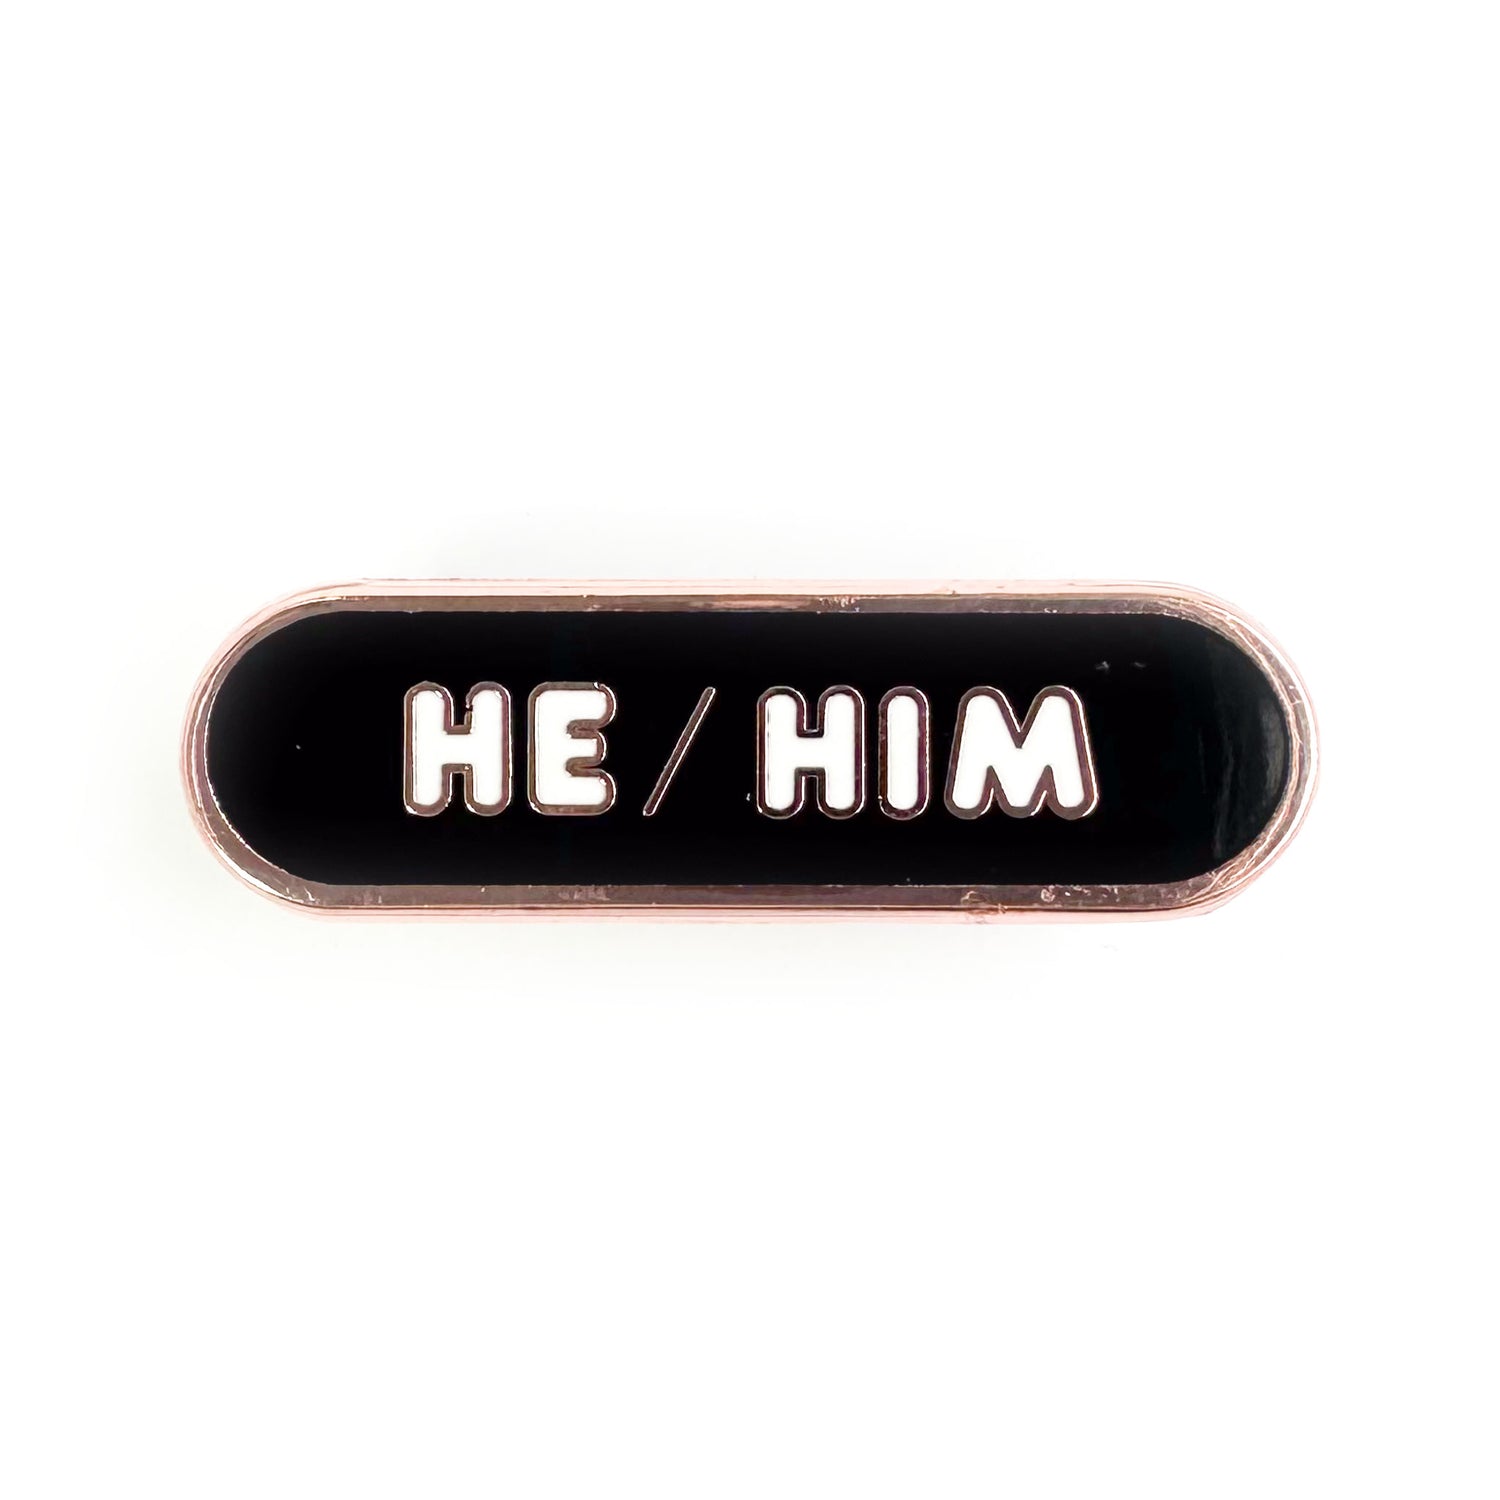 A black capsule shaped pin that reads "He/Him".